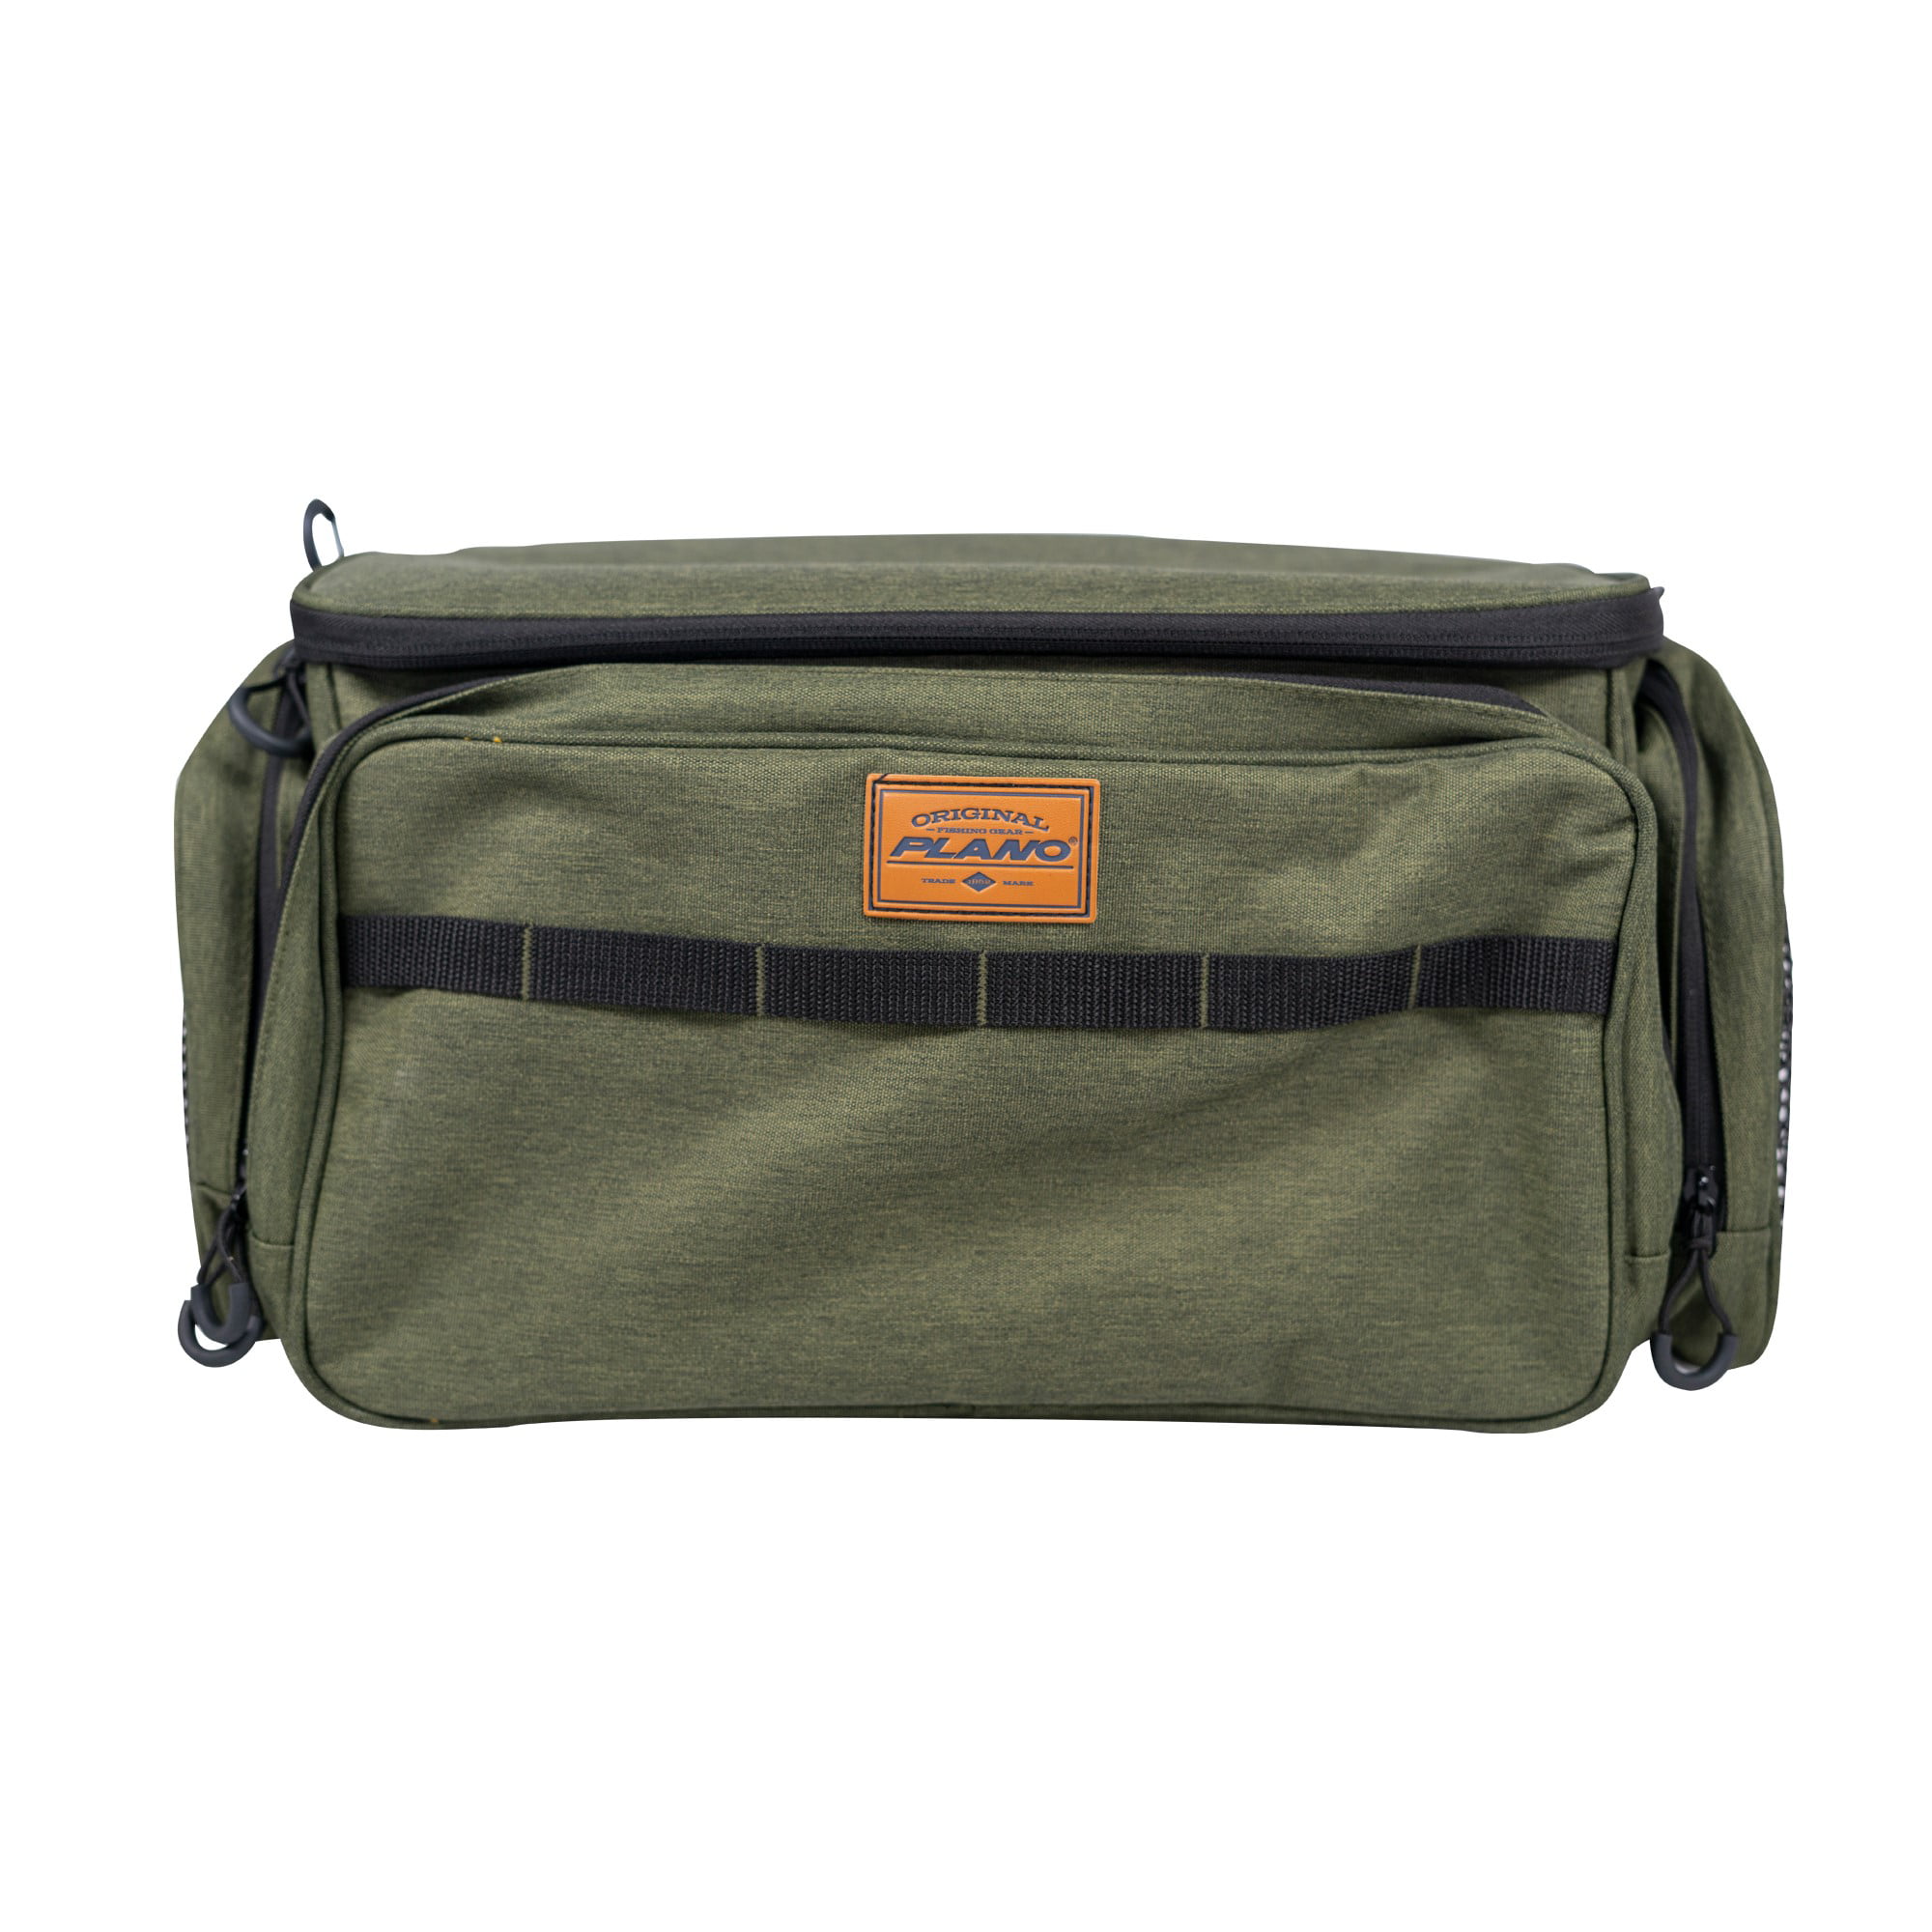 Plano Large 3700 Size Heathered Green Fishing Tackle Bag, with Two